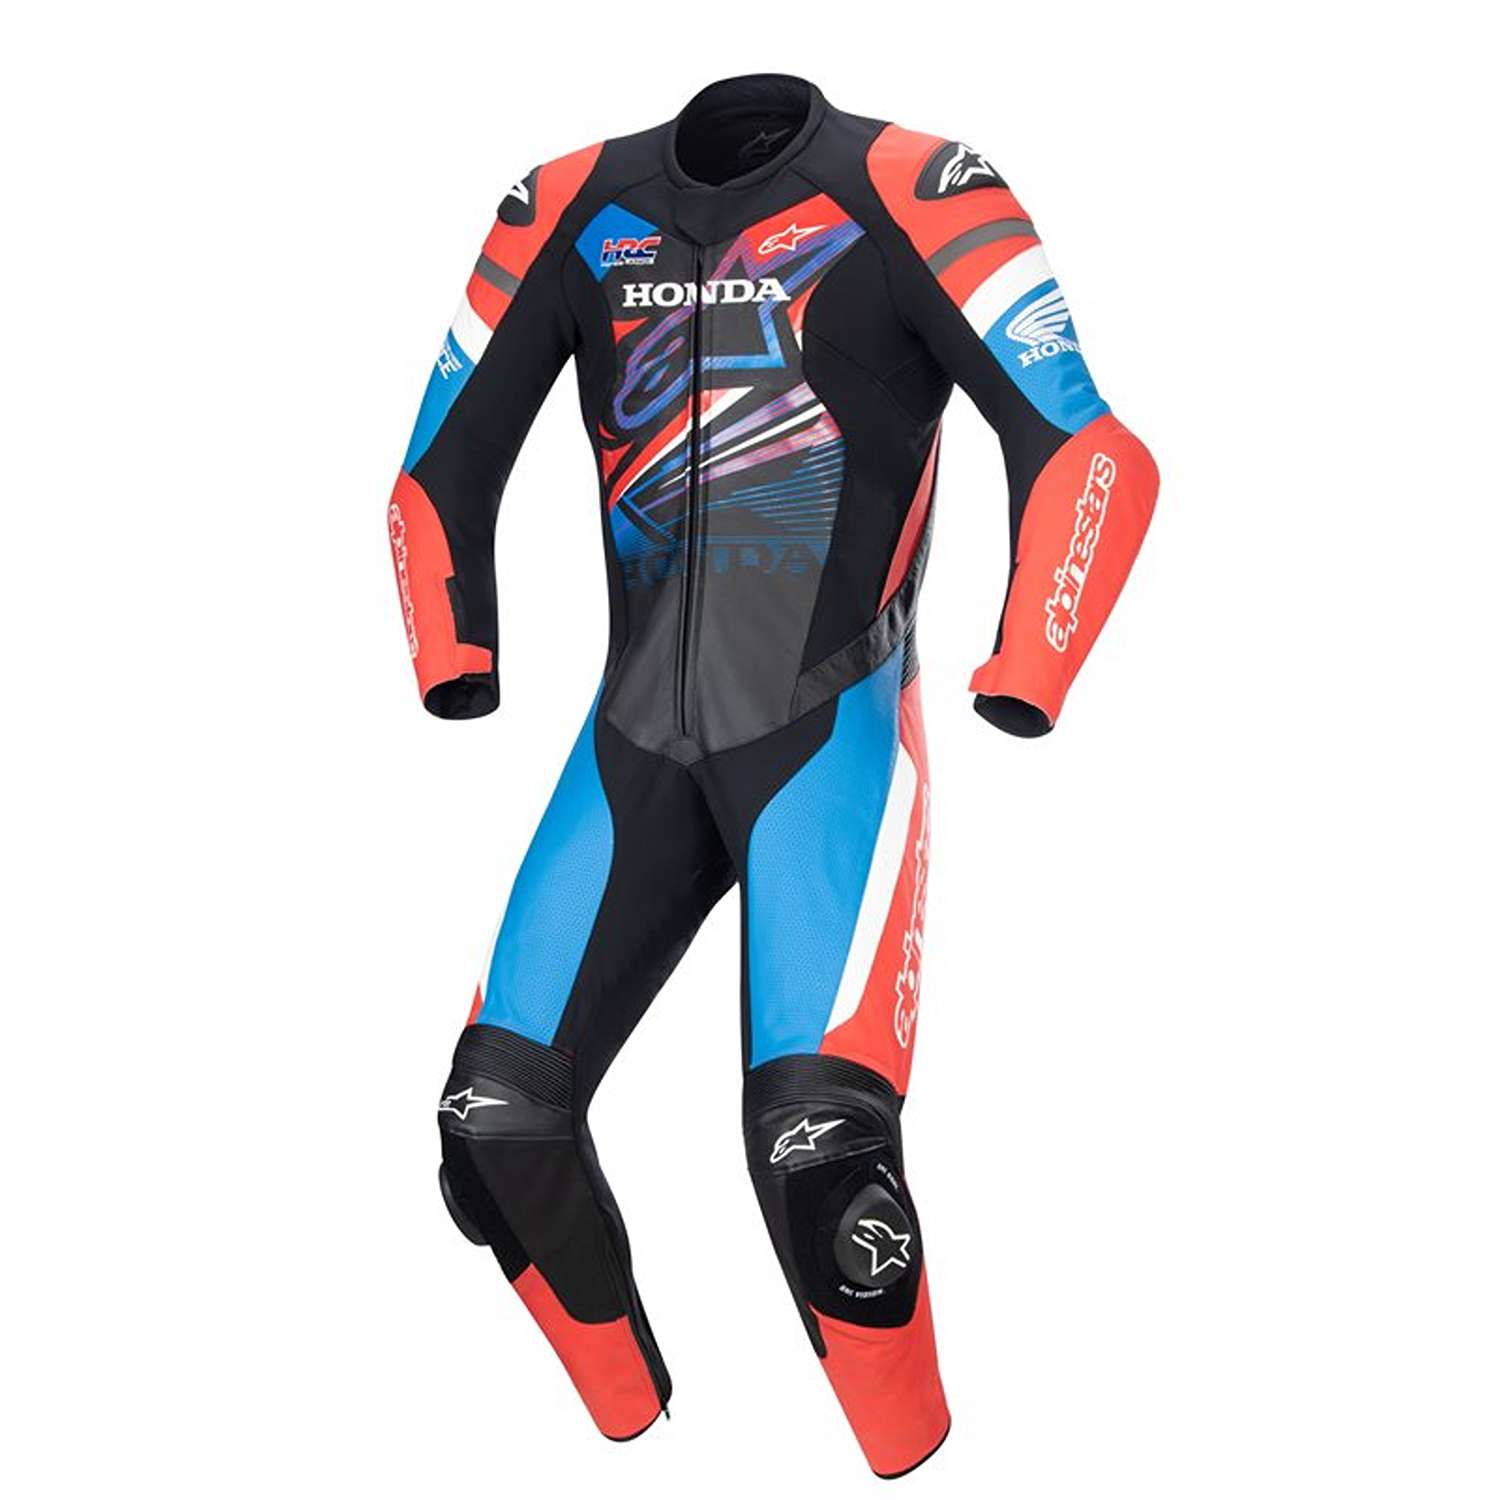 Image of EU Alpinestars Honda Gp Force Leather Suit Black Bright Red Blue Taille 52